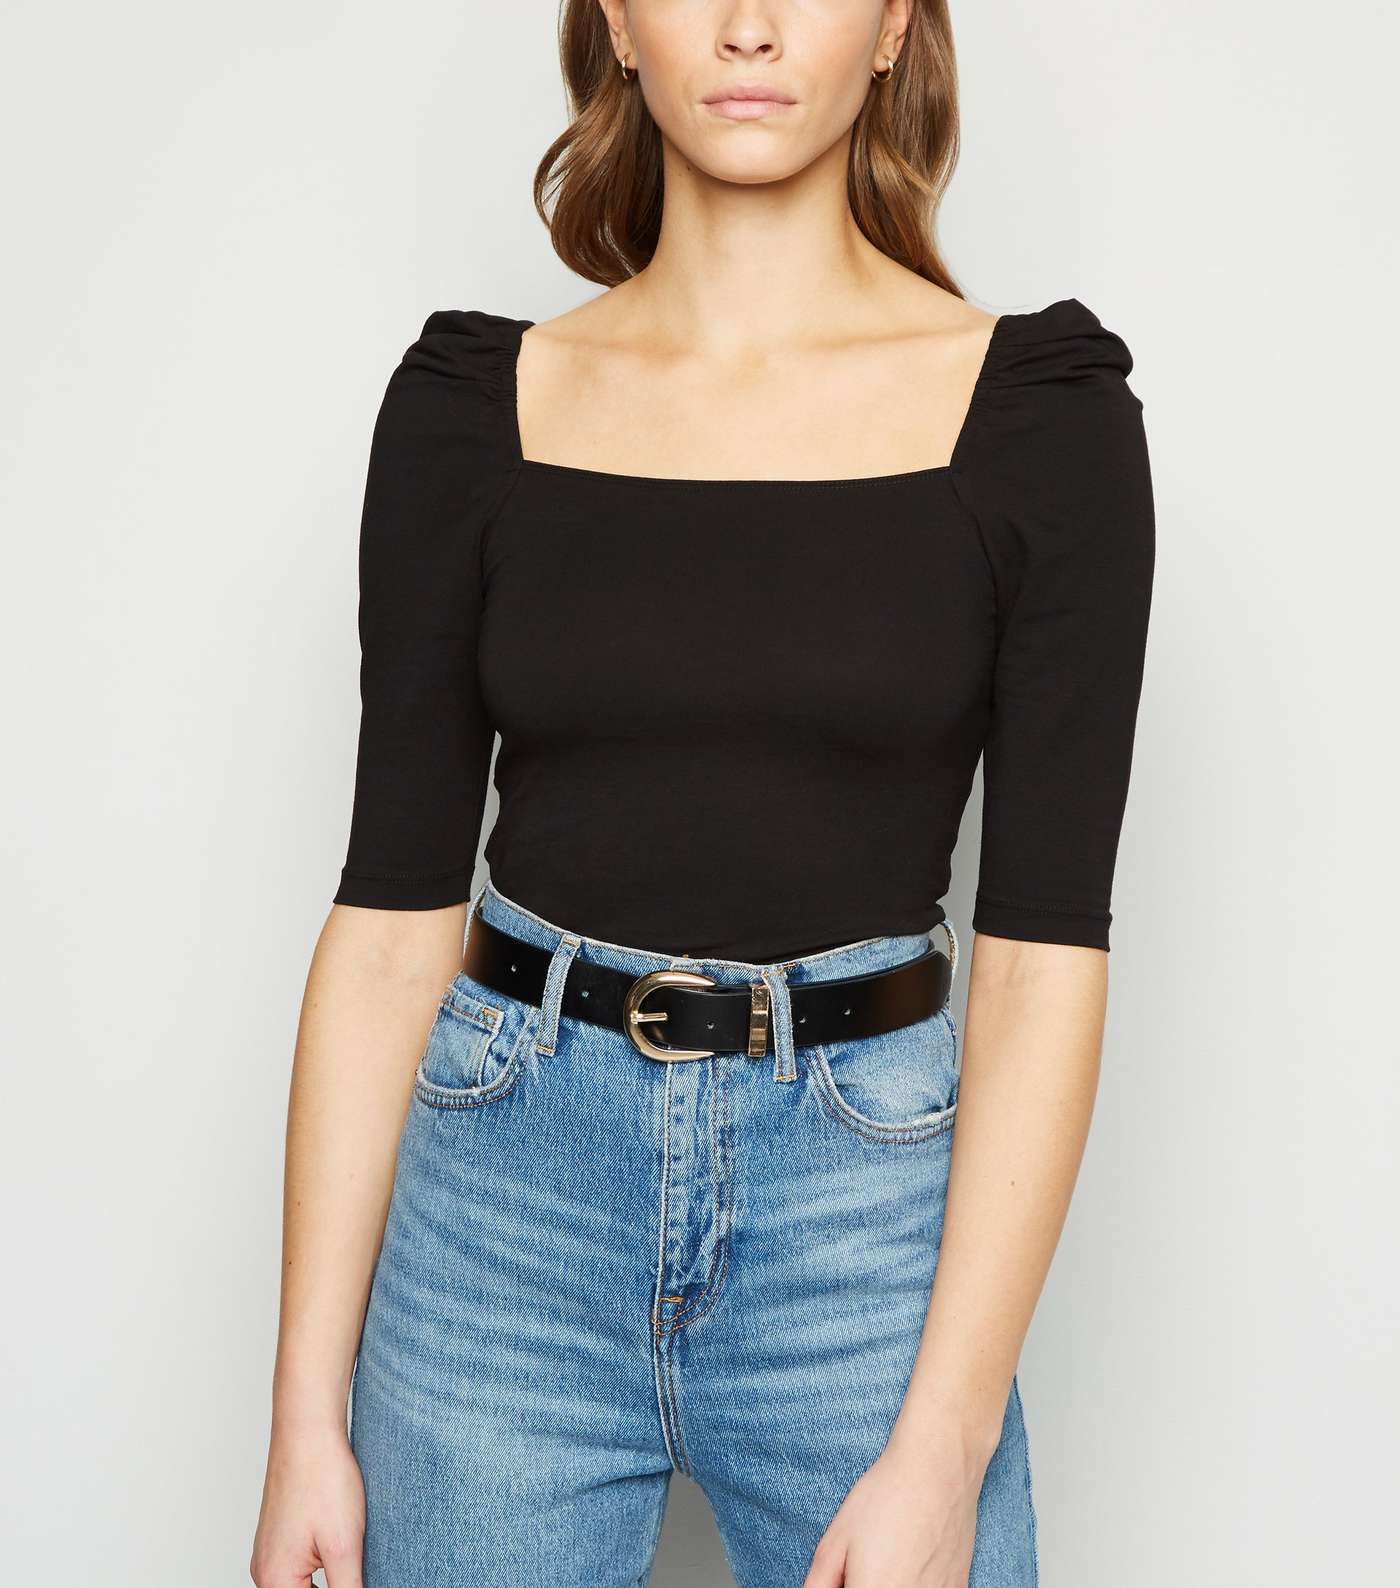 Black Square Neck Puff Sleeve Top